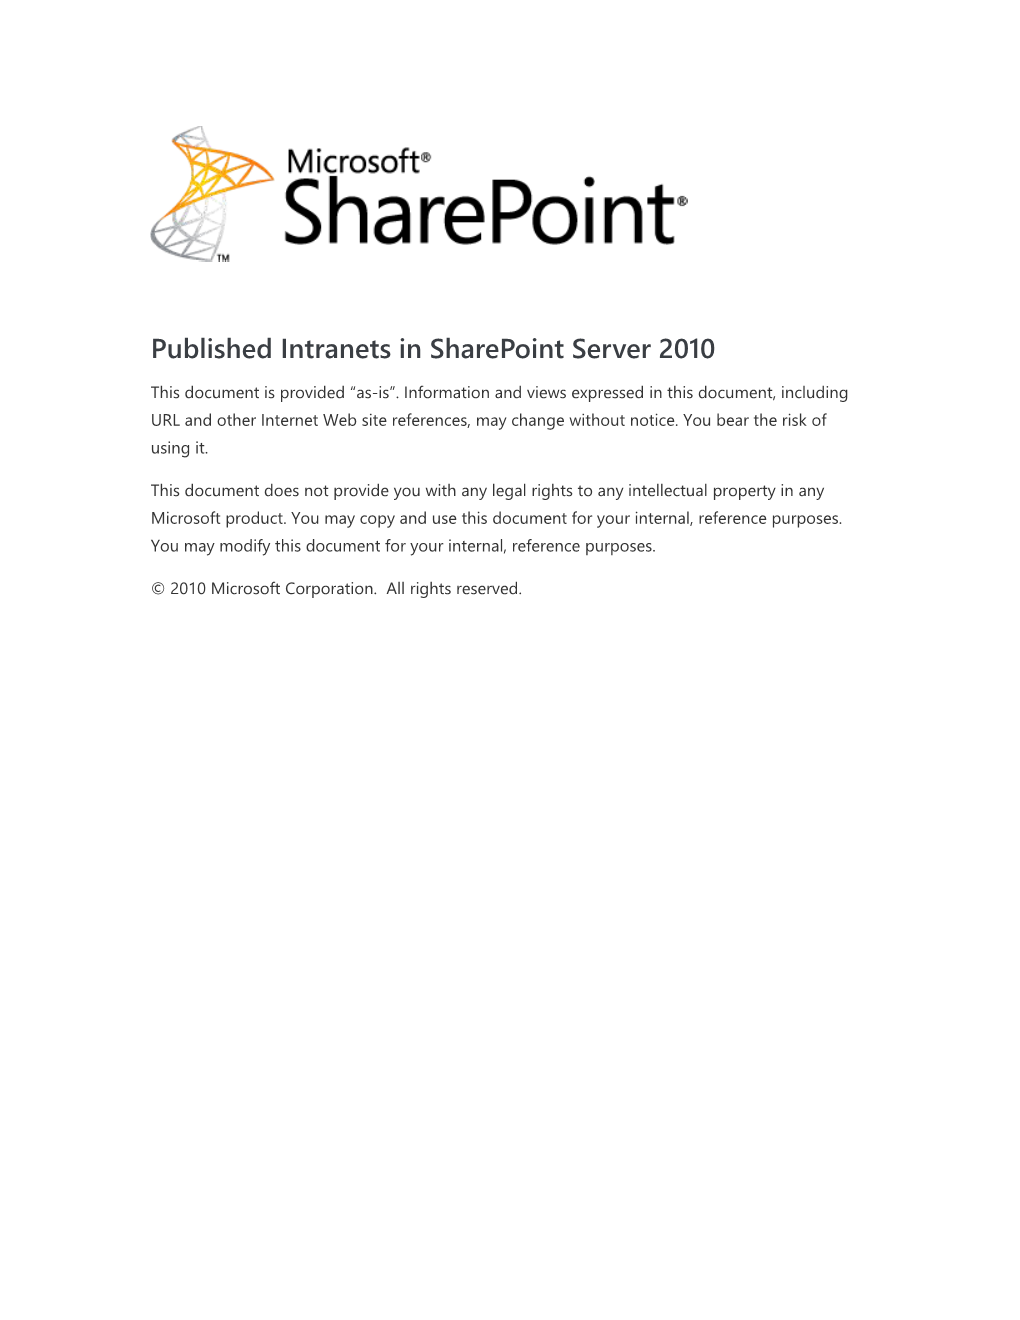 Published Intranets in Sharepoint Server 2010